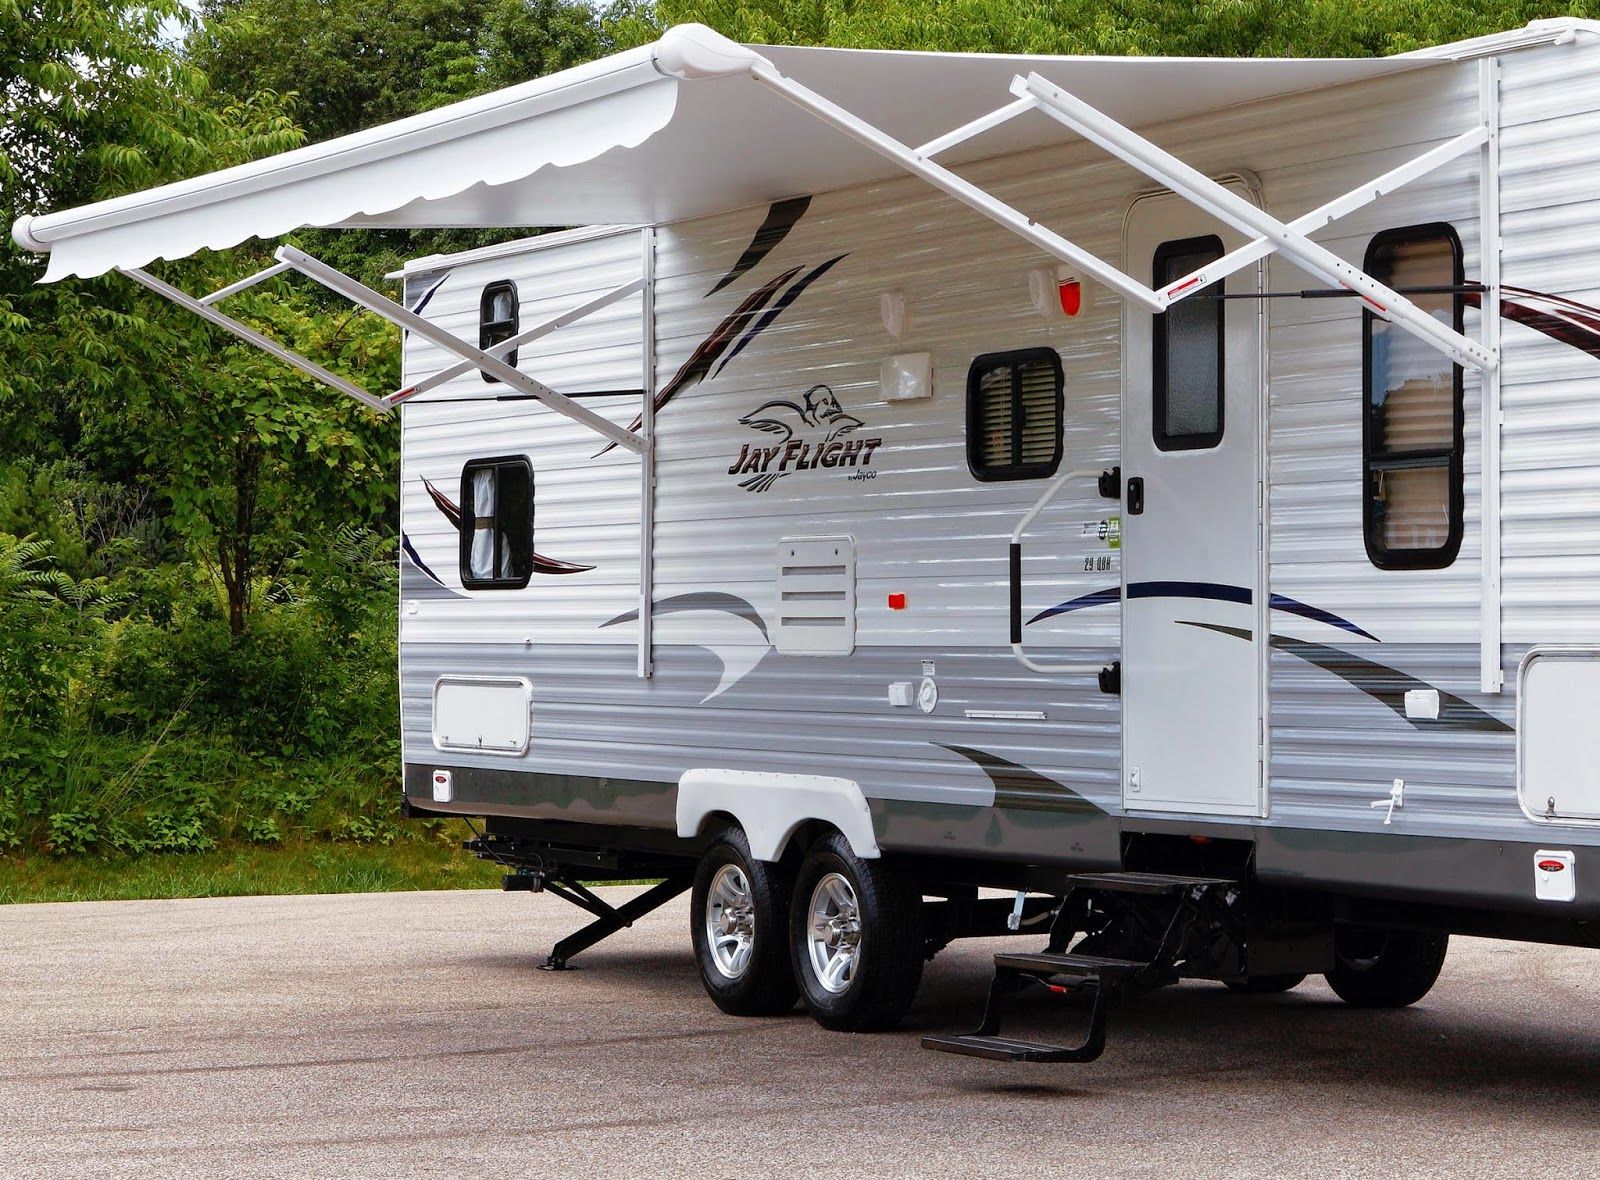 RV Rental Prices: How much does it cost to rent a travel trailer in Alberta?